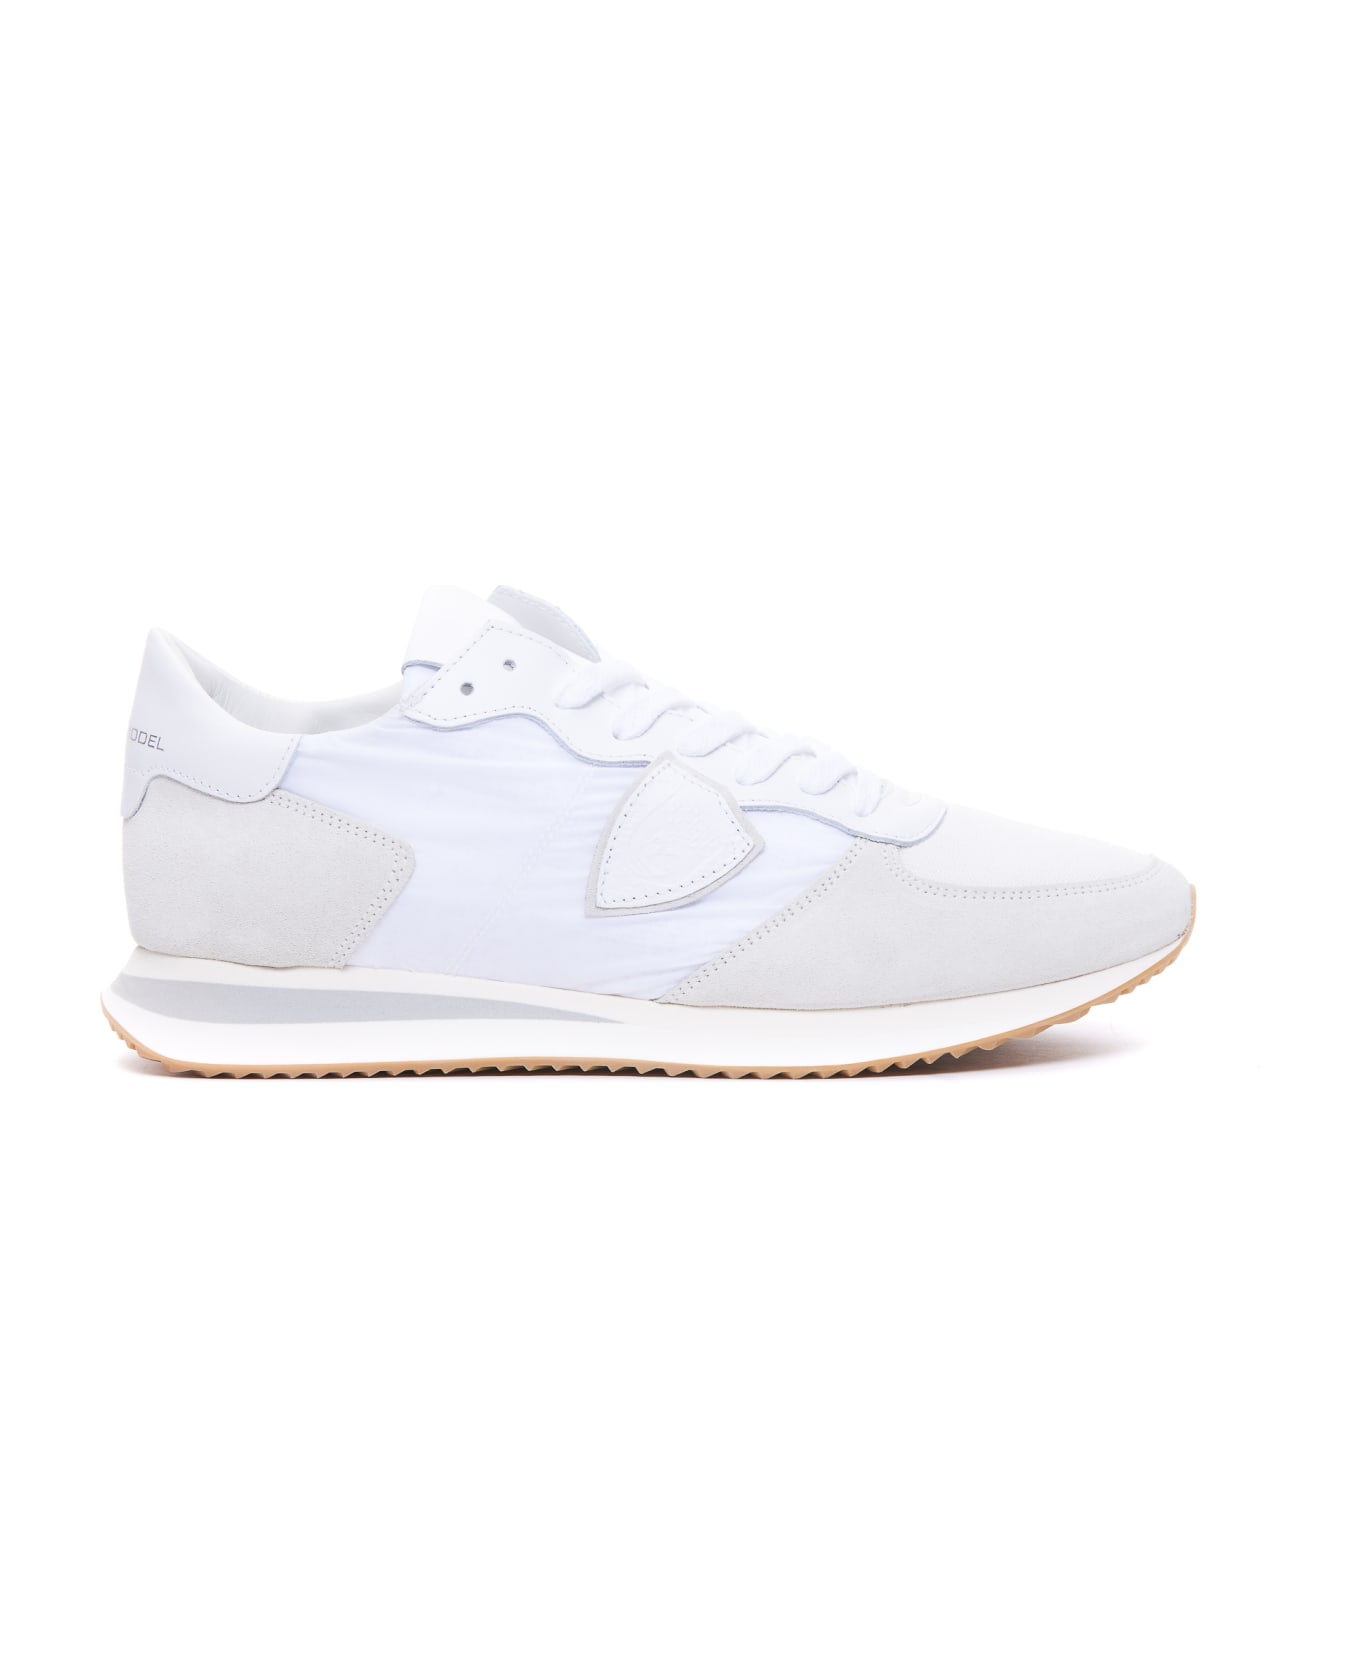 Philippe Model Tropez Low Sneakers - White スニーカー